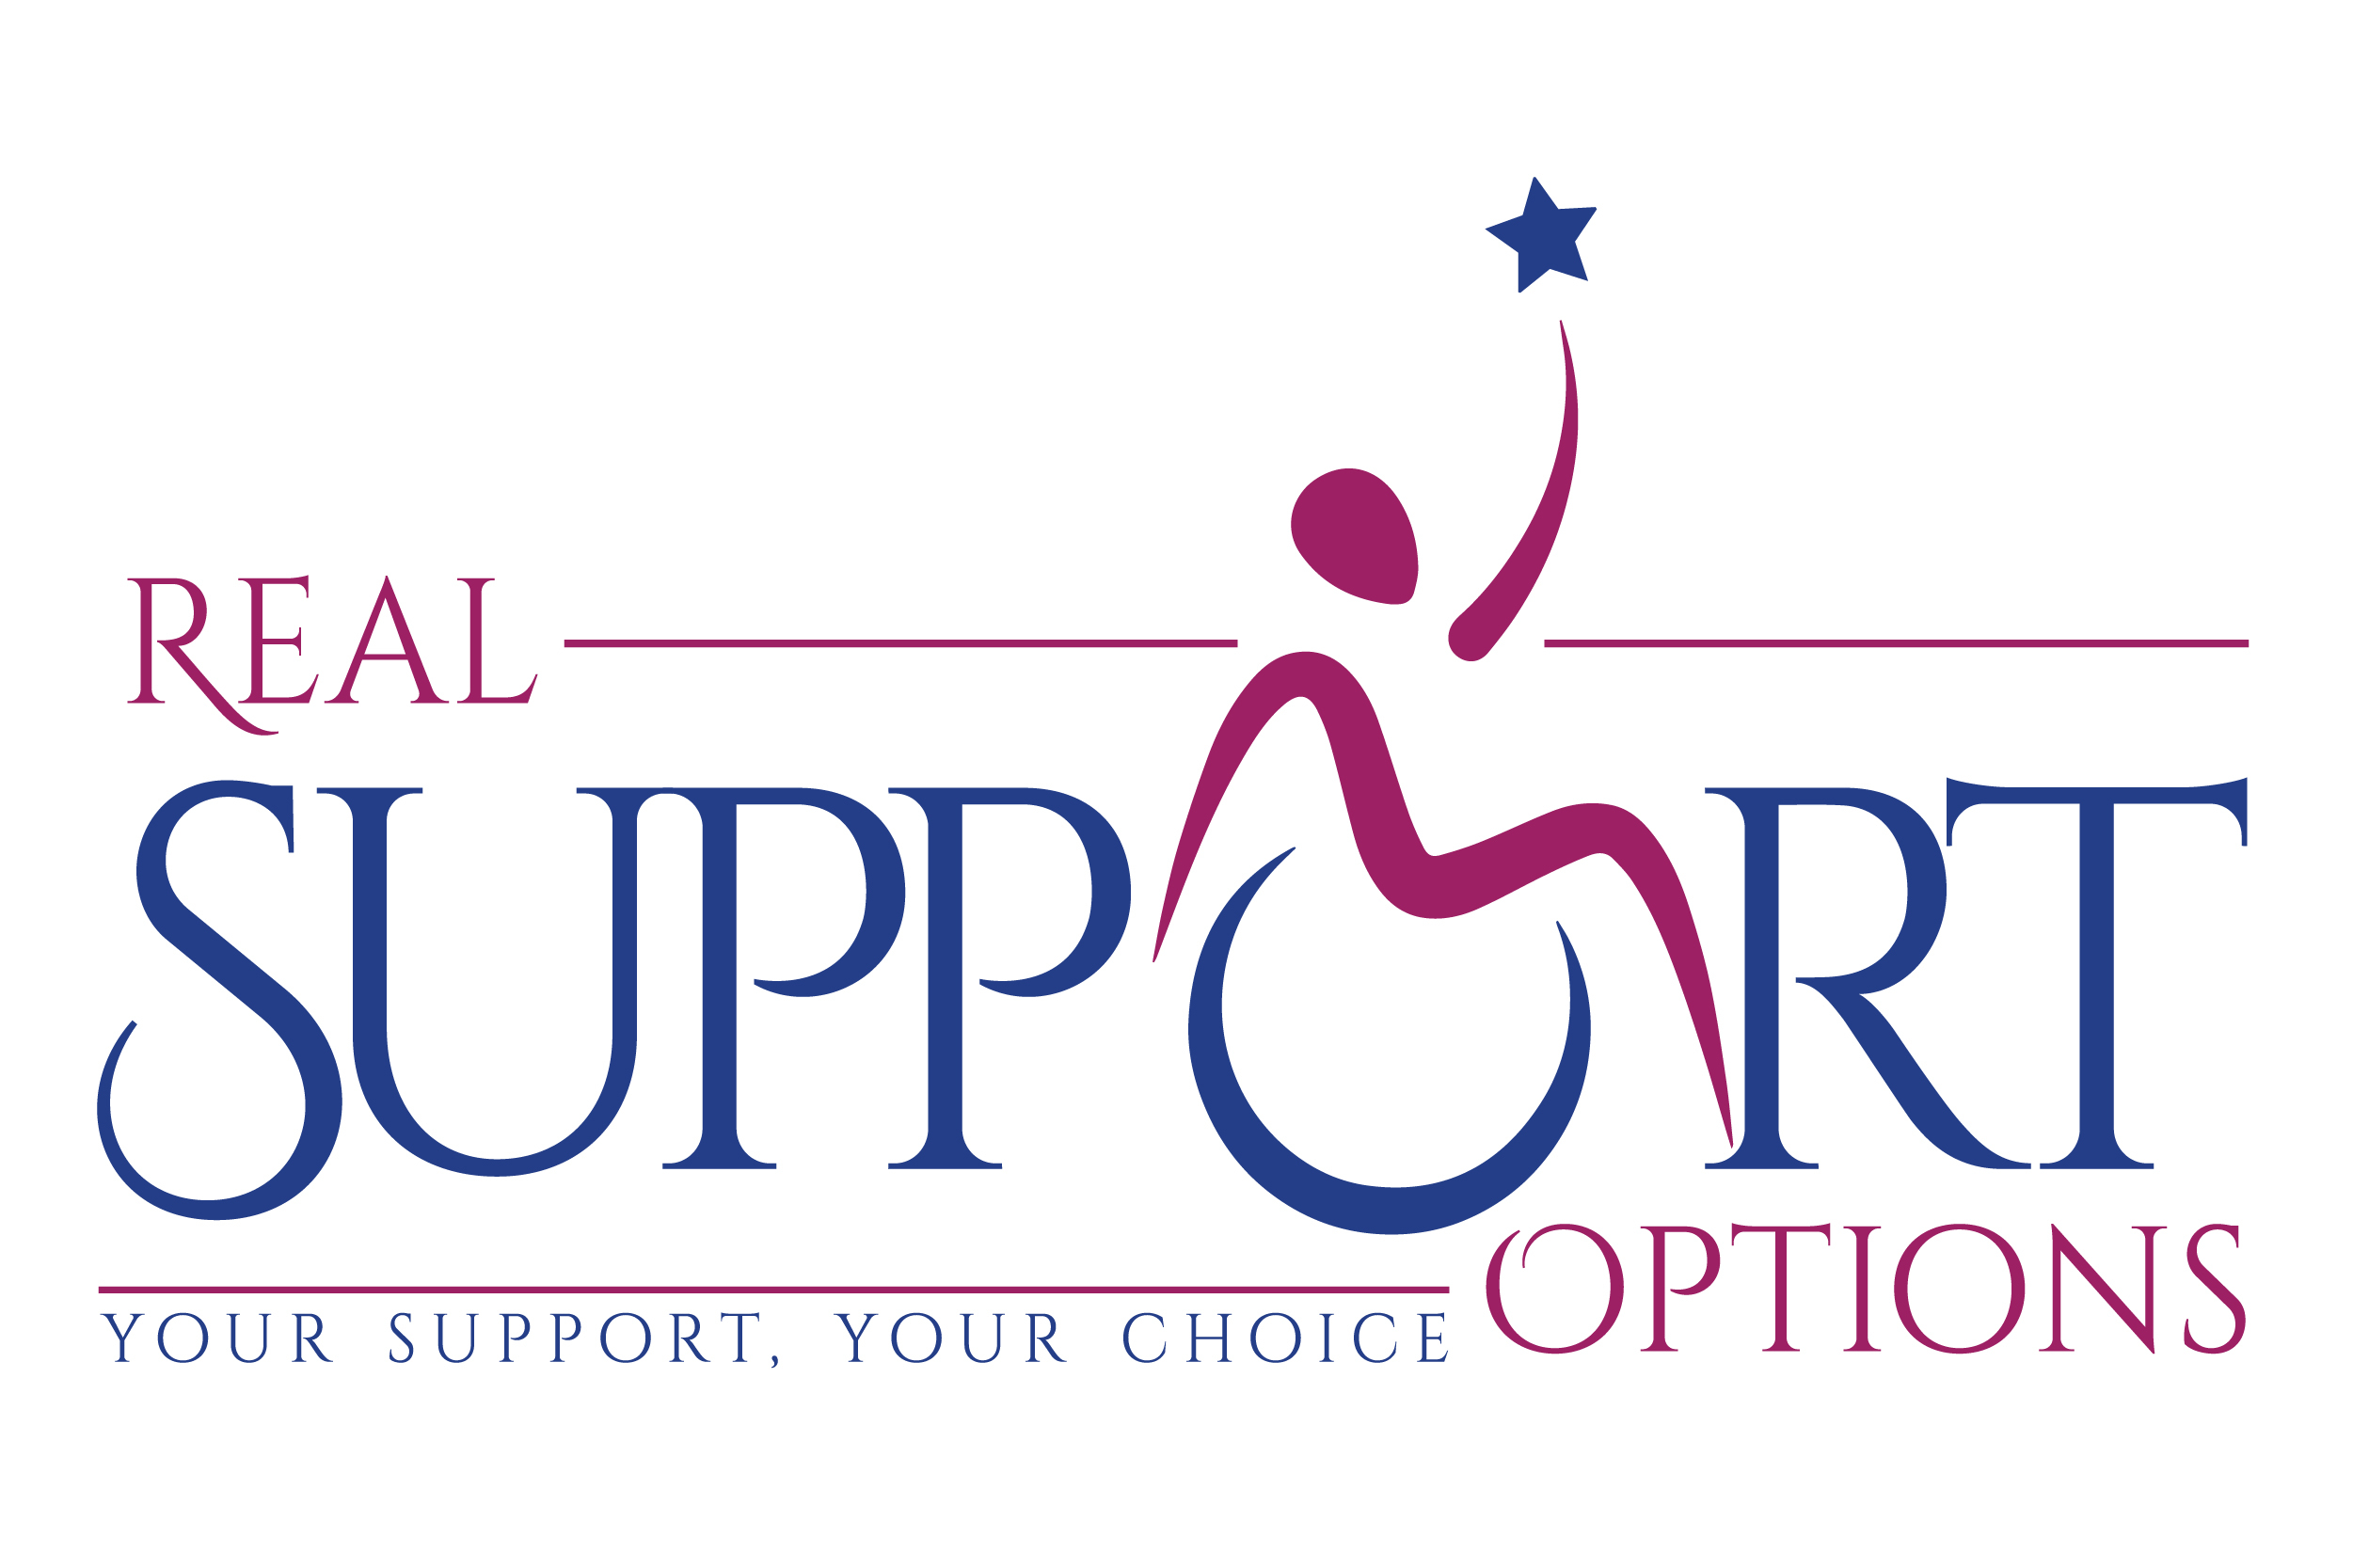 Real Support Options